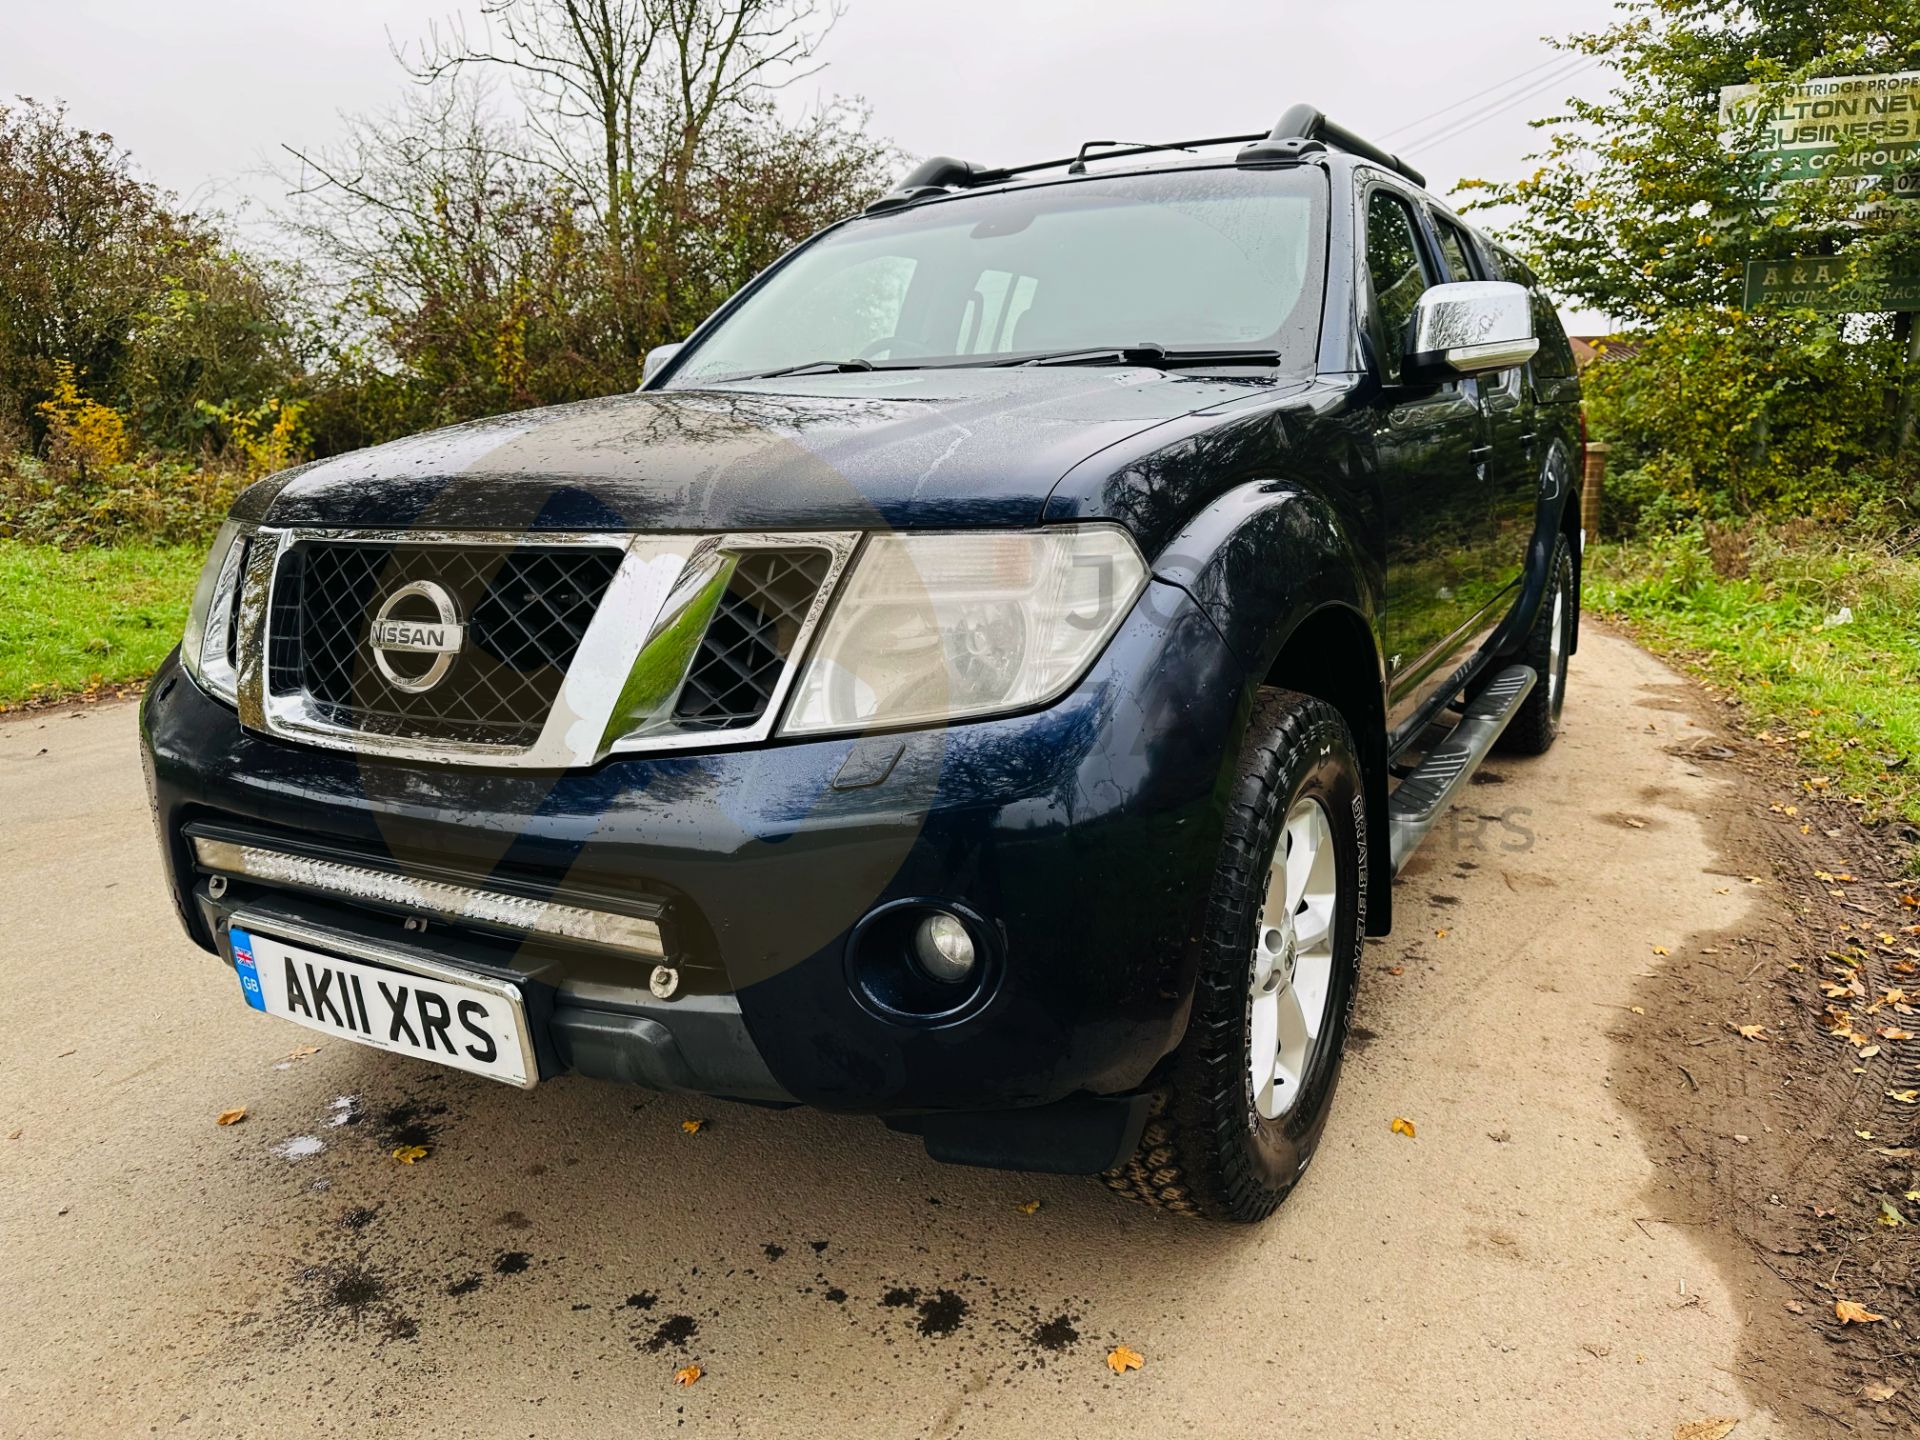 (ON SALE)NISSAN NAVARA *OUTLAW EDITION* 3.0 V6 TURBO DIESEL AUTOMATIC DOUBLE CAB PICKUP - 11 REG - Image 7 of 43